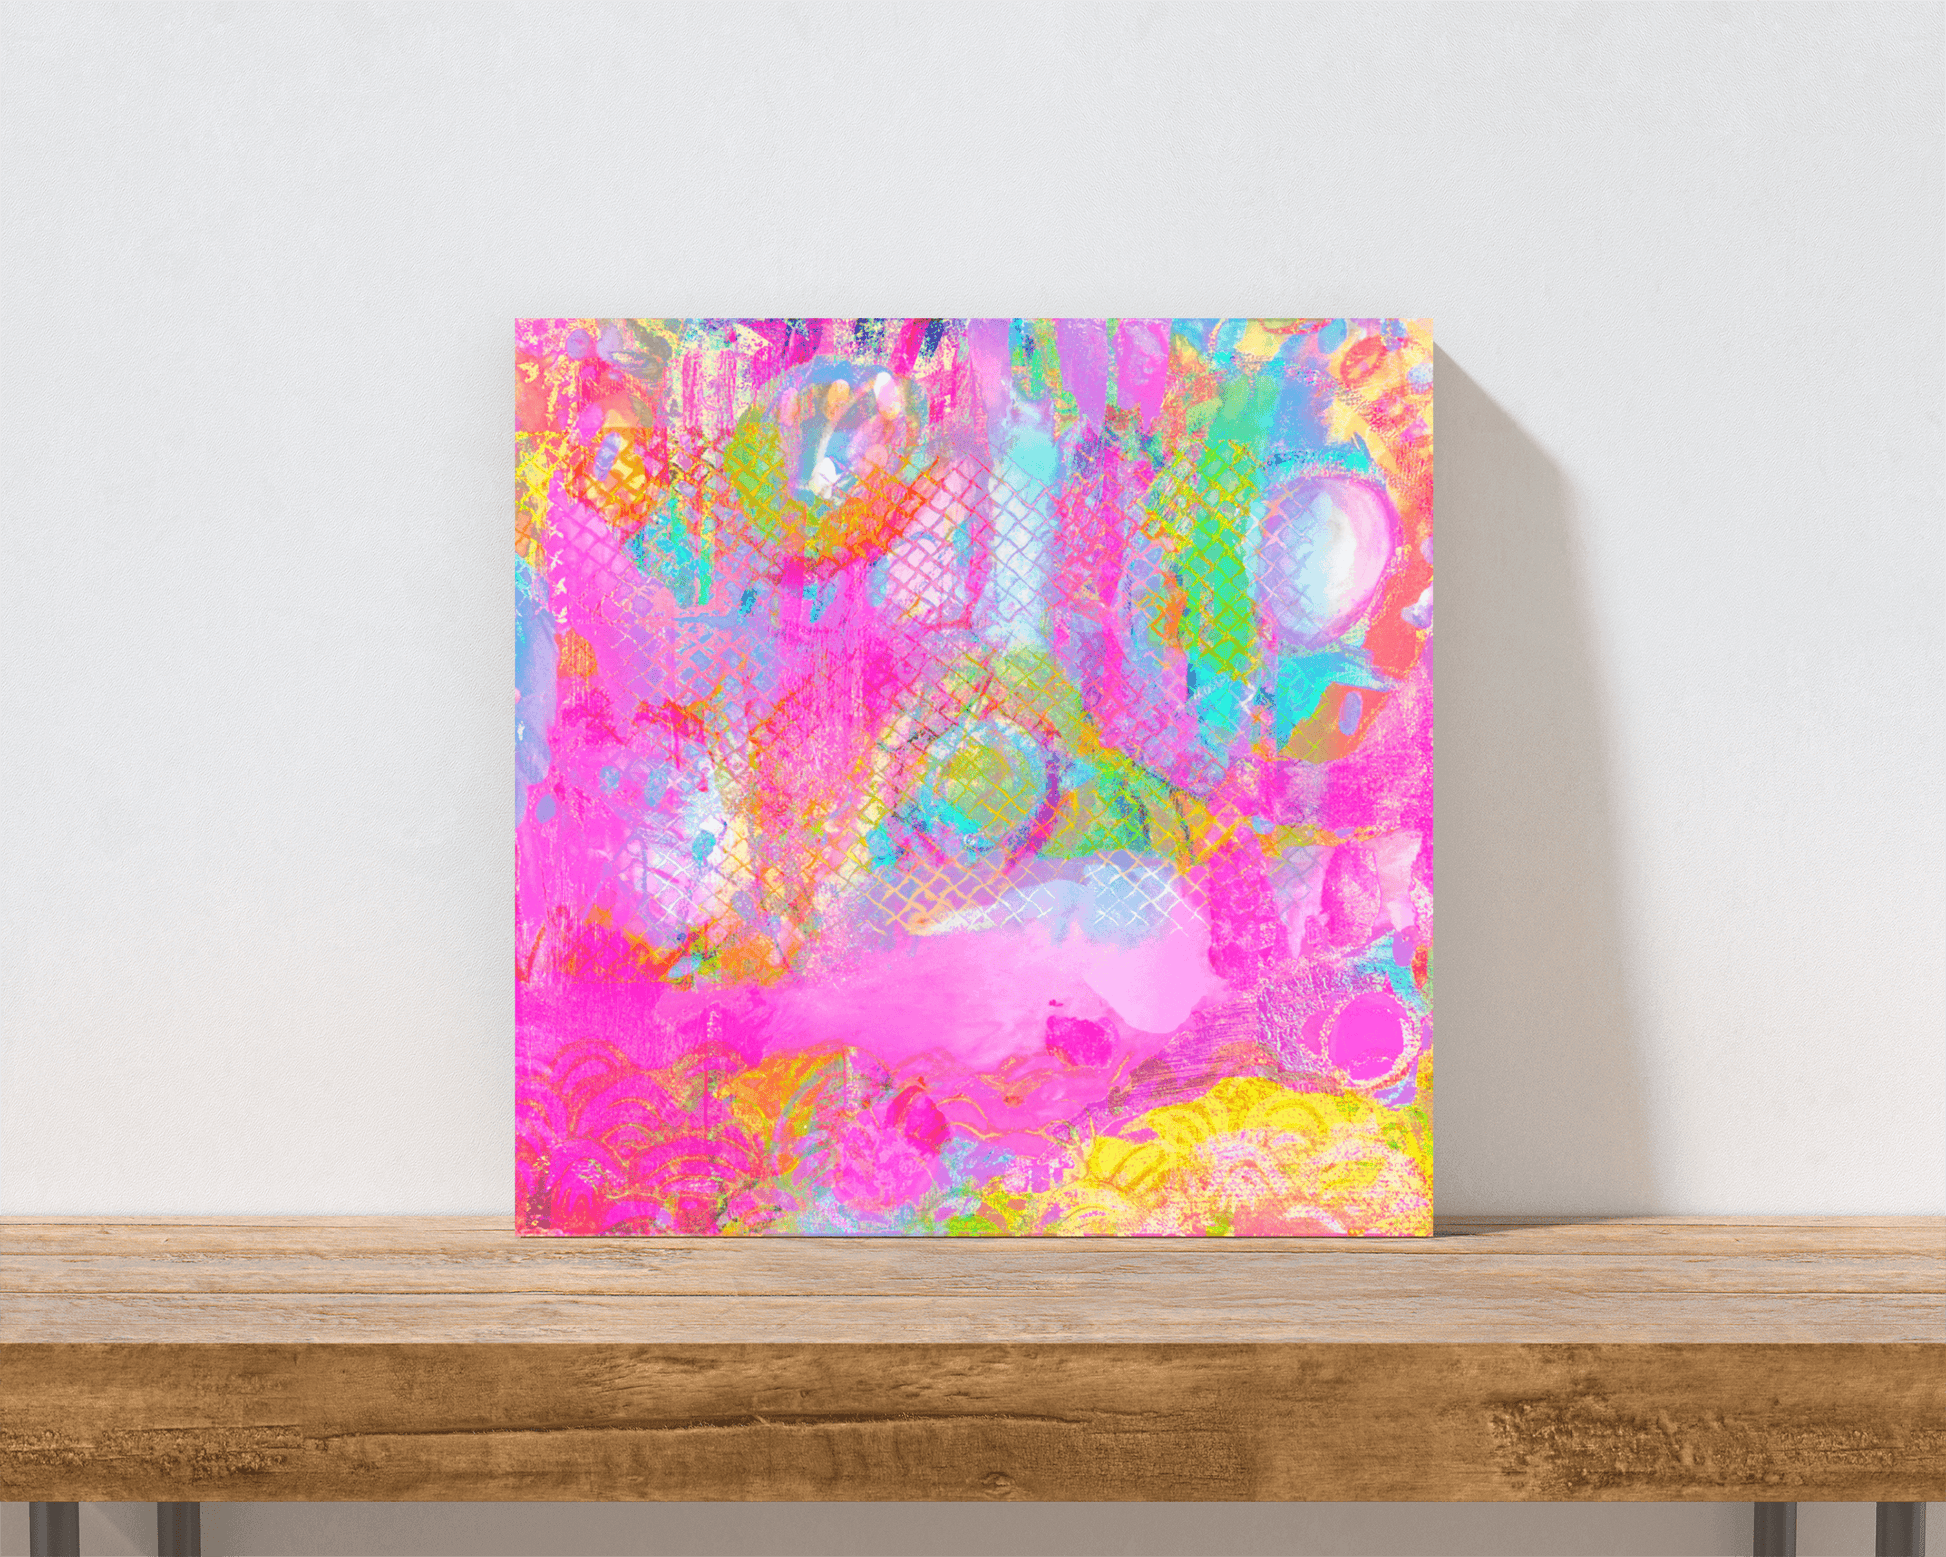 Drippy Pink “Candyland” Abstract Art Canvas Print Wall Art Small Canvas on Shelf